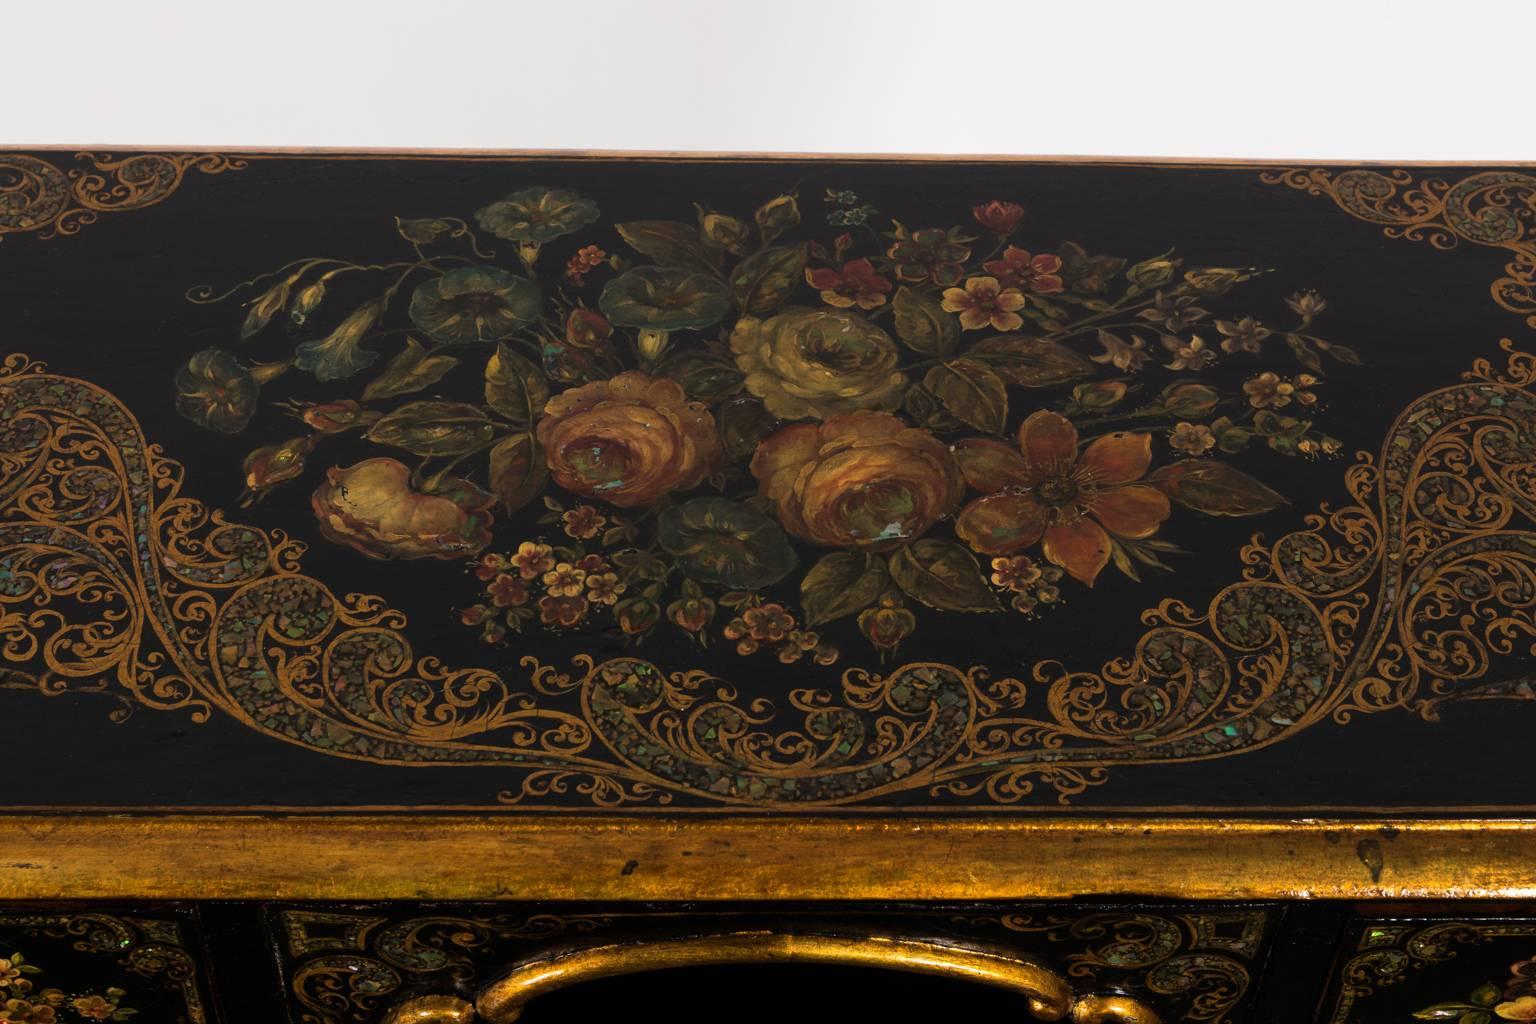 This is an original Napoleon III piece dated anywhere between 1850-1870. The floral decor is hand-painted with gold stamping and embellished with mother-of-pearl inserts, very high quality of craftsmanship. This desk belonged to Maria Felix.
 